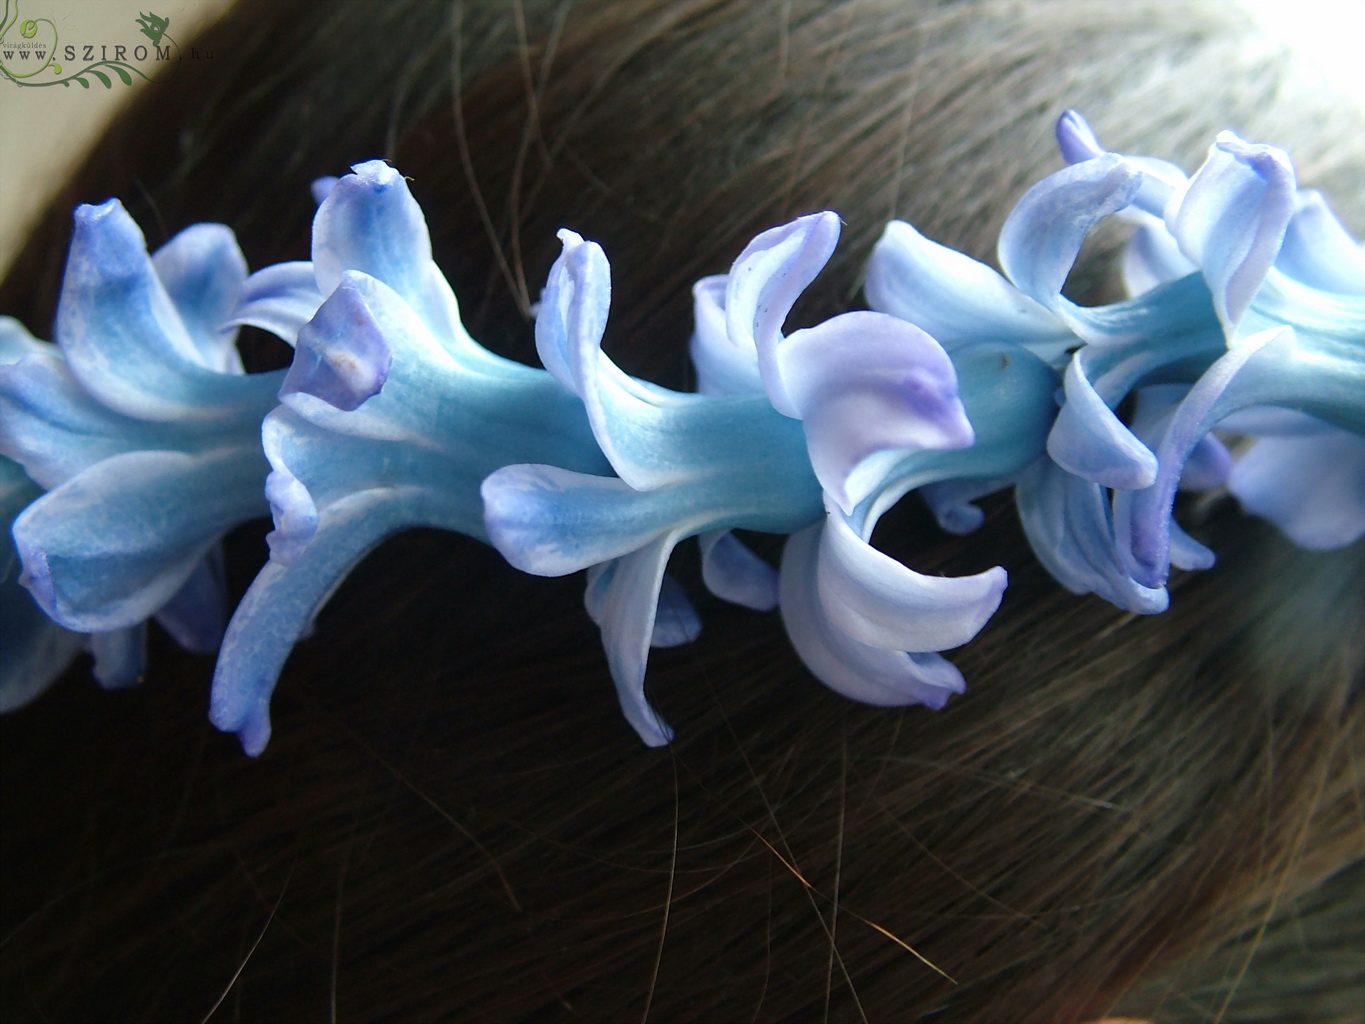 flower delivery Budapest - hair wreath made of hyacinths (blue)